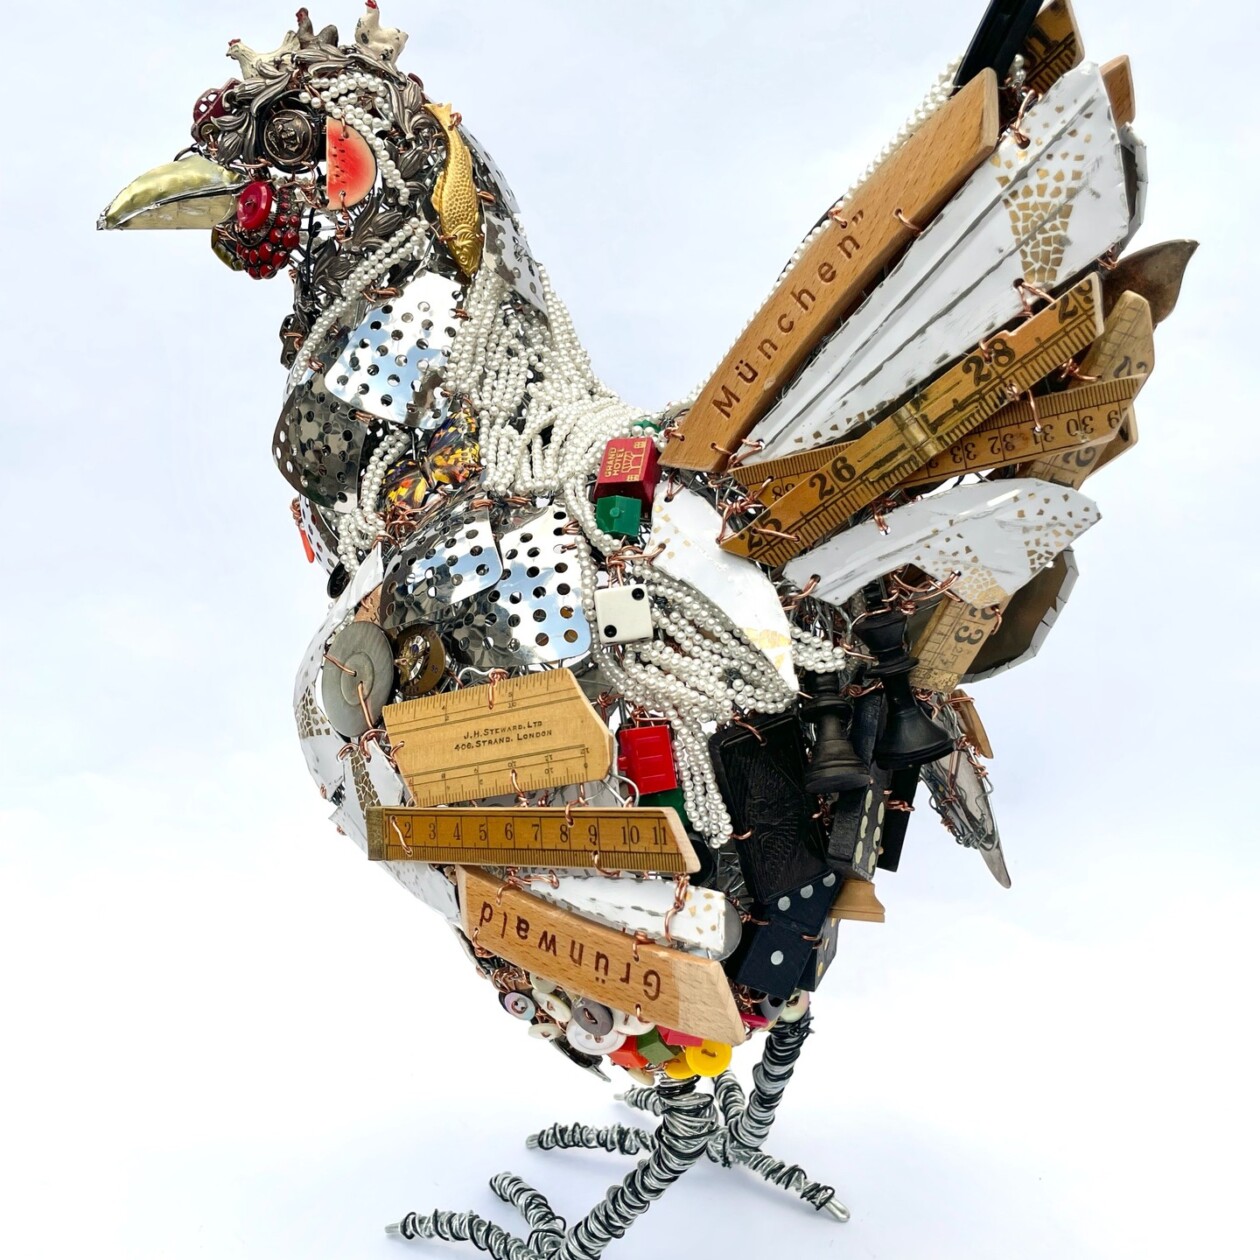 Bird Sculptures Made From Recycled Metal Scraps By Barbara Franc (5)